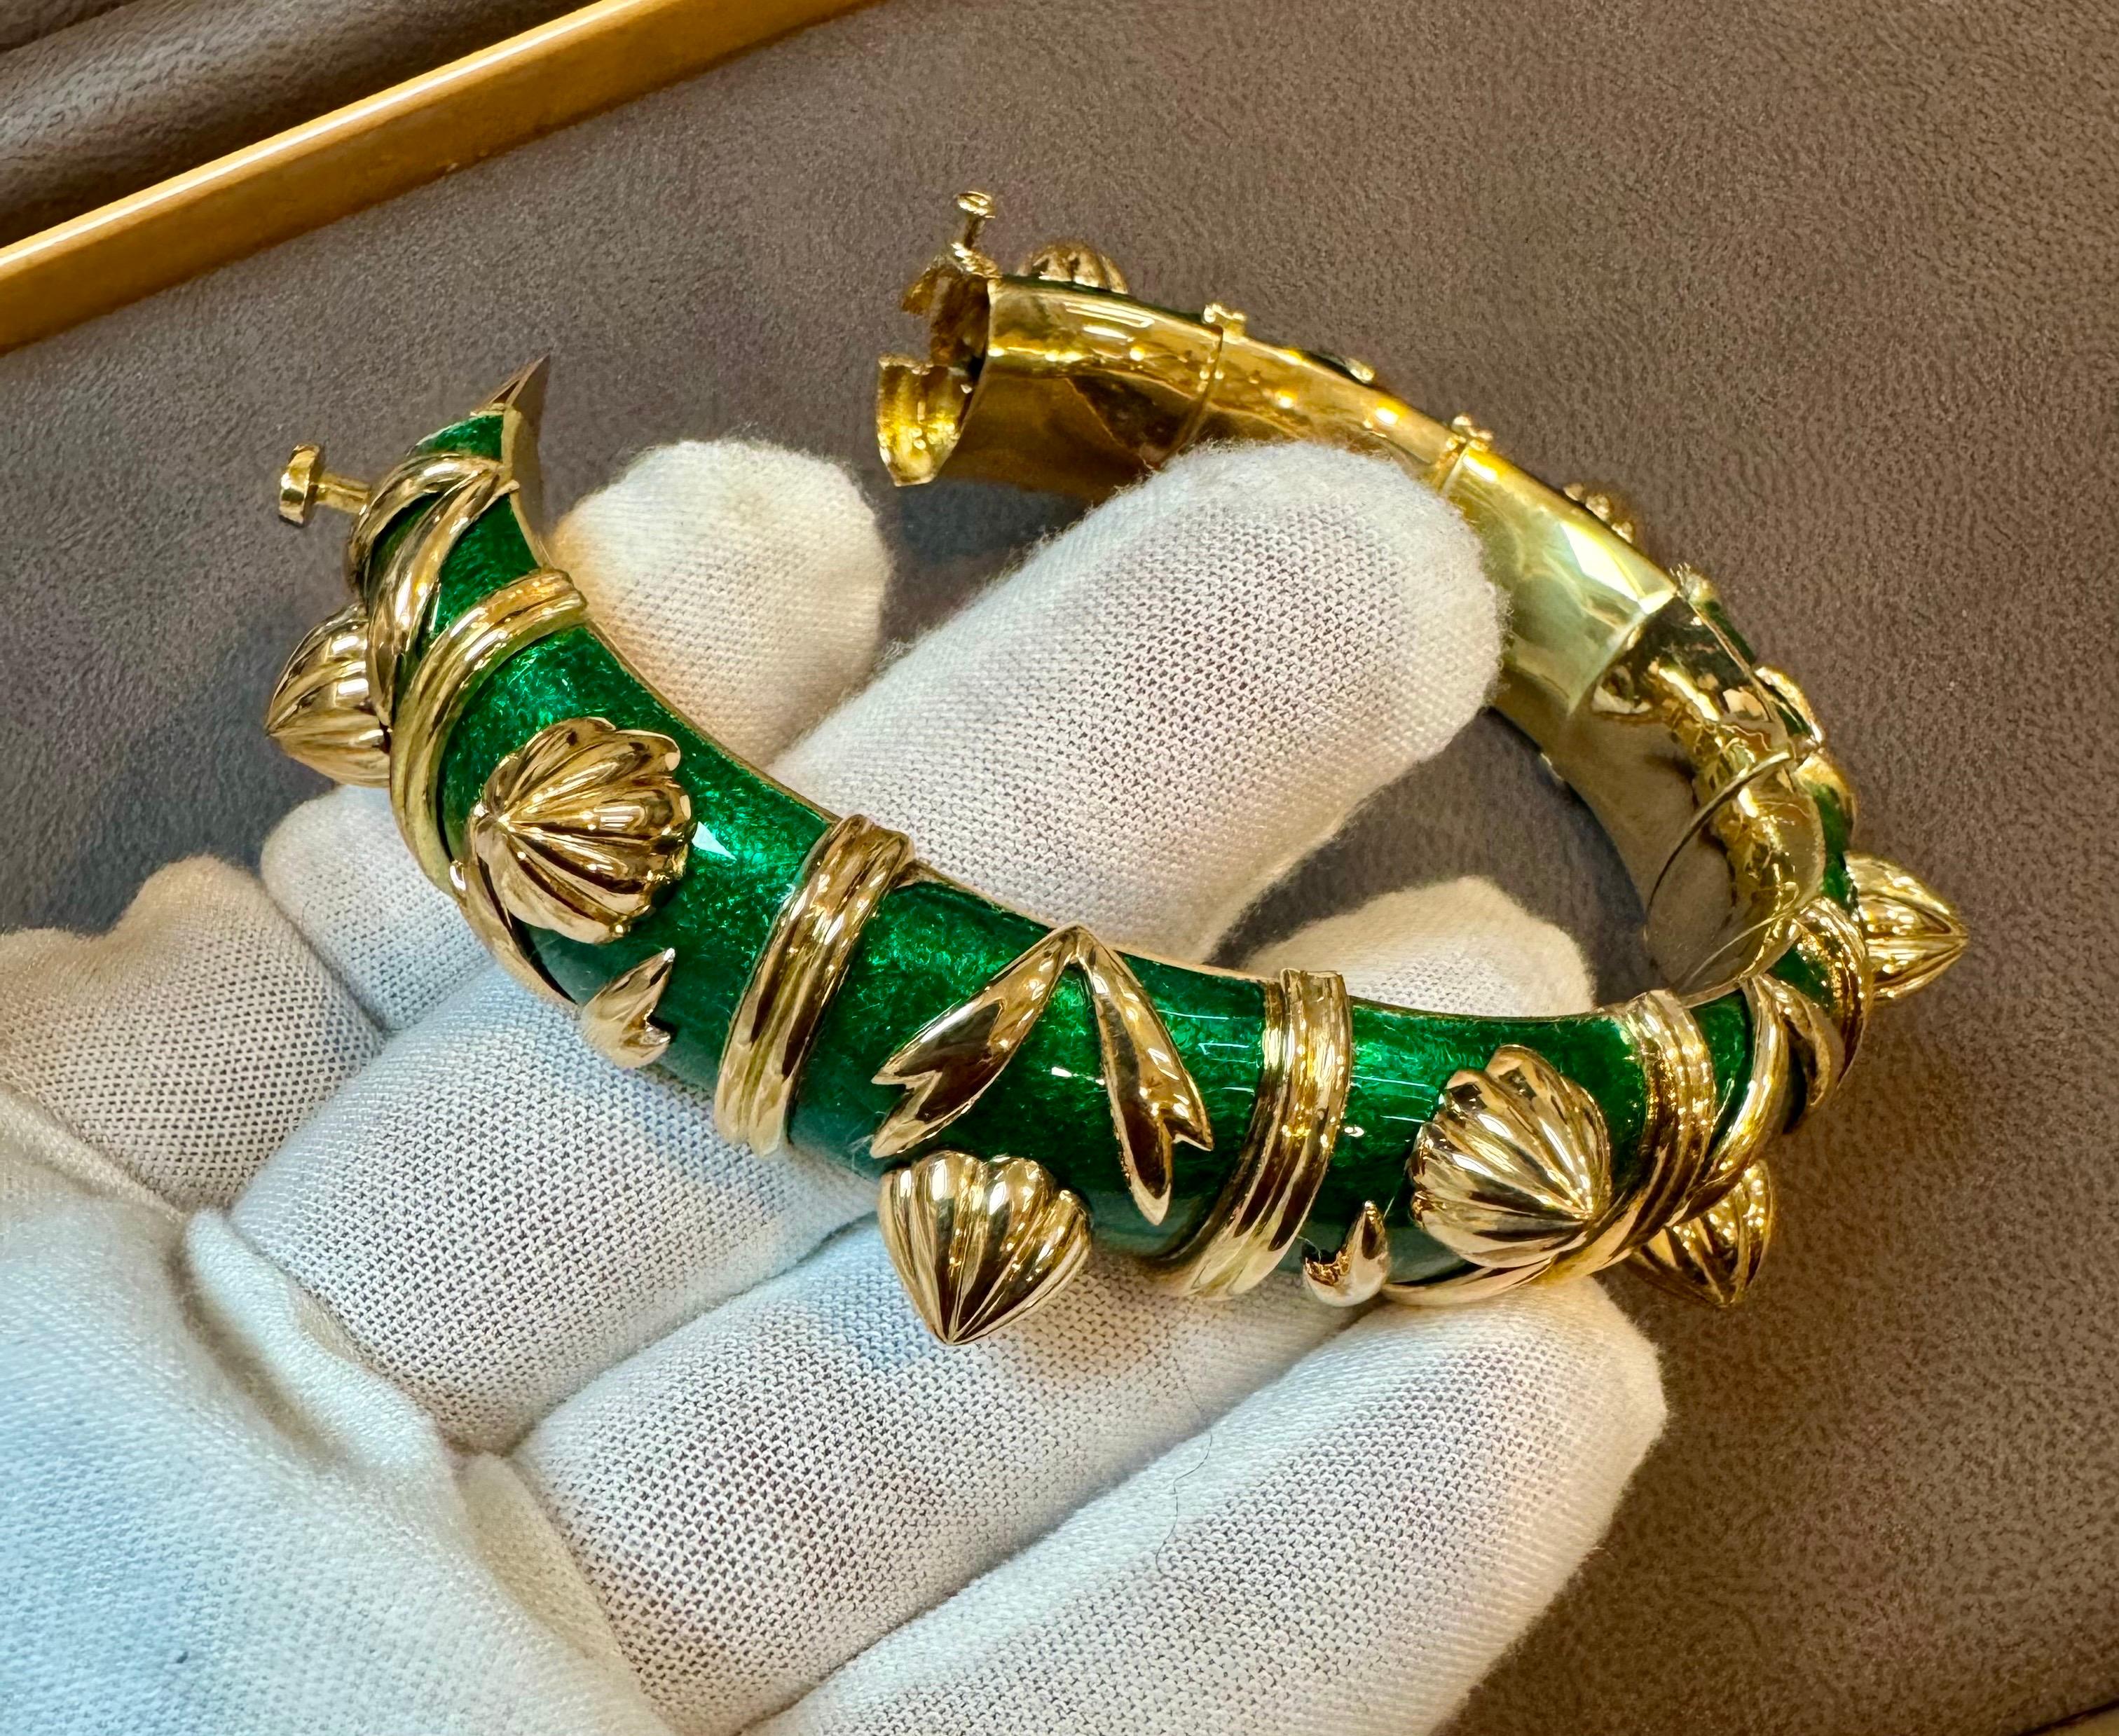 Stunning Tiffany & Co. Schlumberger Cone Losange Bracelet, crafted in 18k yellow gold and enriched with vibrant  Green enamel, accented with alternating clusters of gold leaves  and cone shape gold structures, separated by gold rings. The bracelet